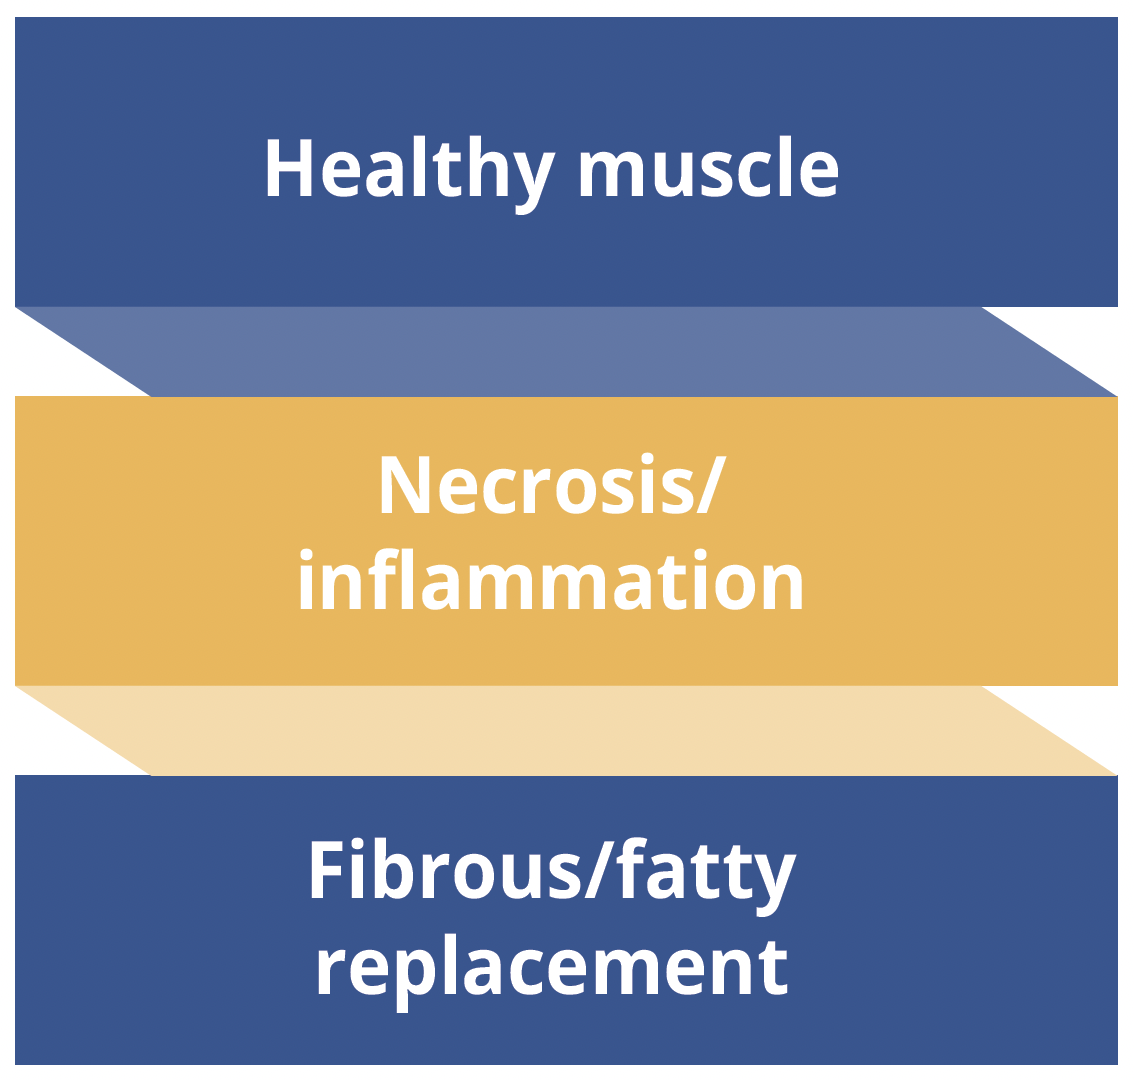 Muscular dystrophies progress from healthy muscle, through a period of necrosis and inflammation which culminates in fibrous